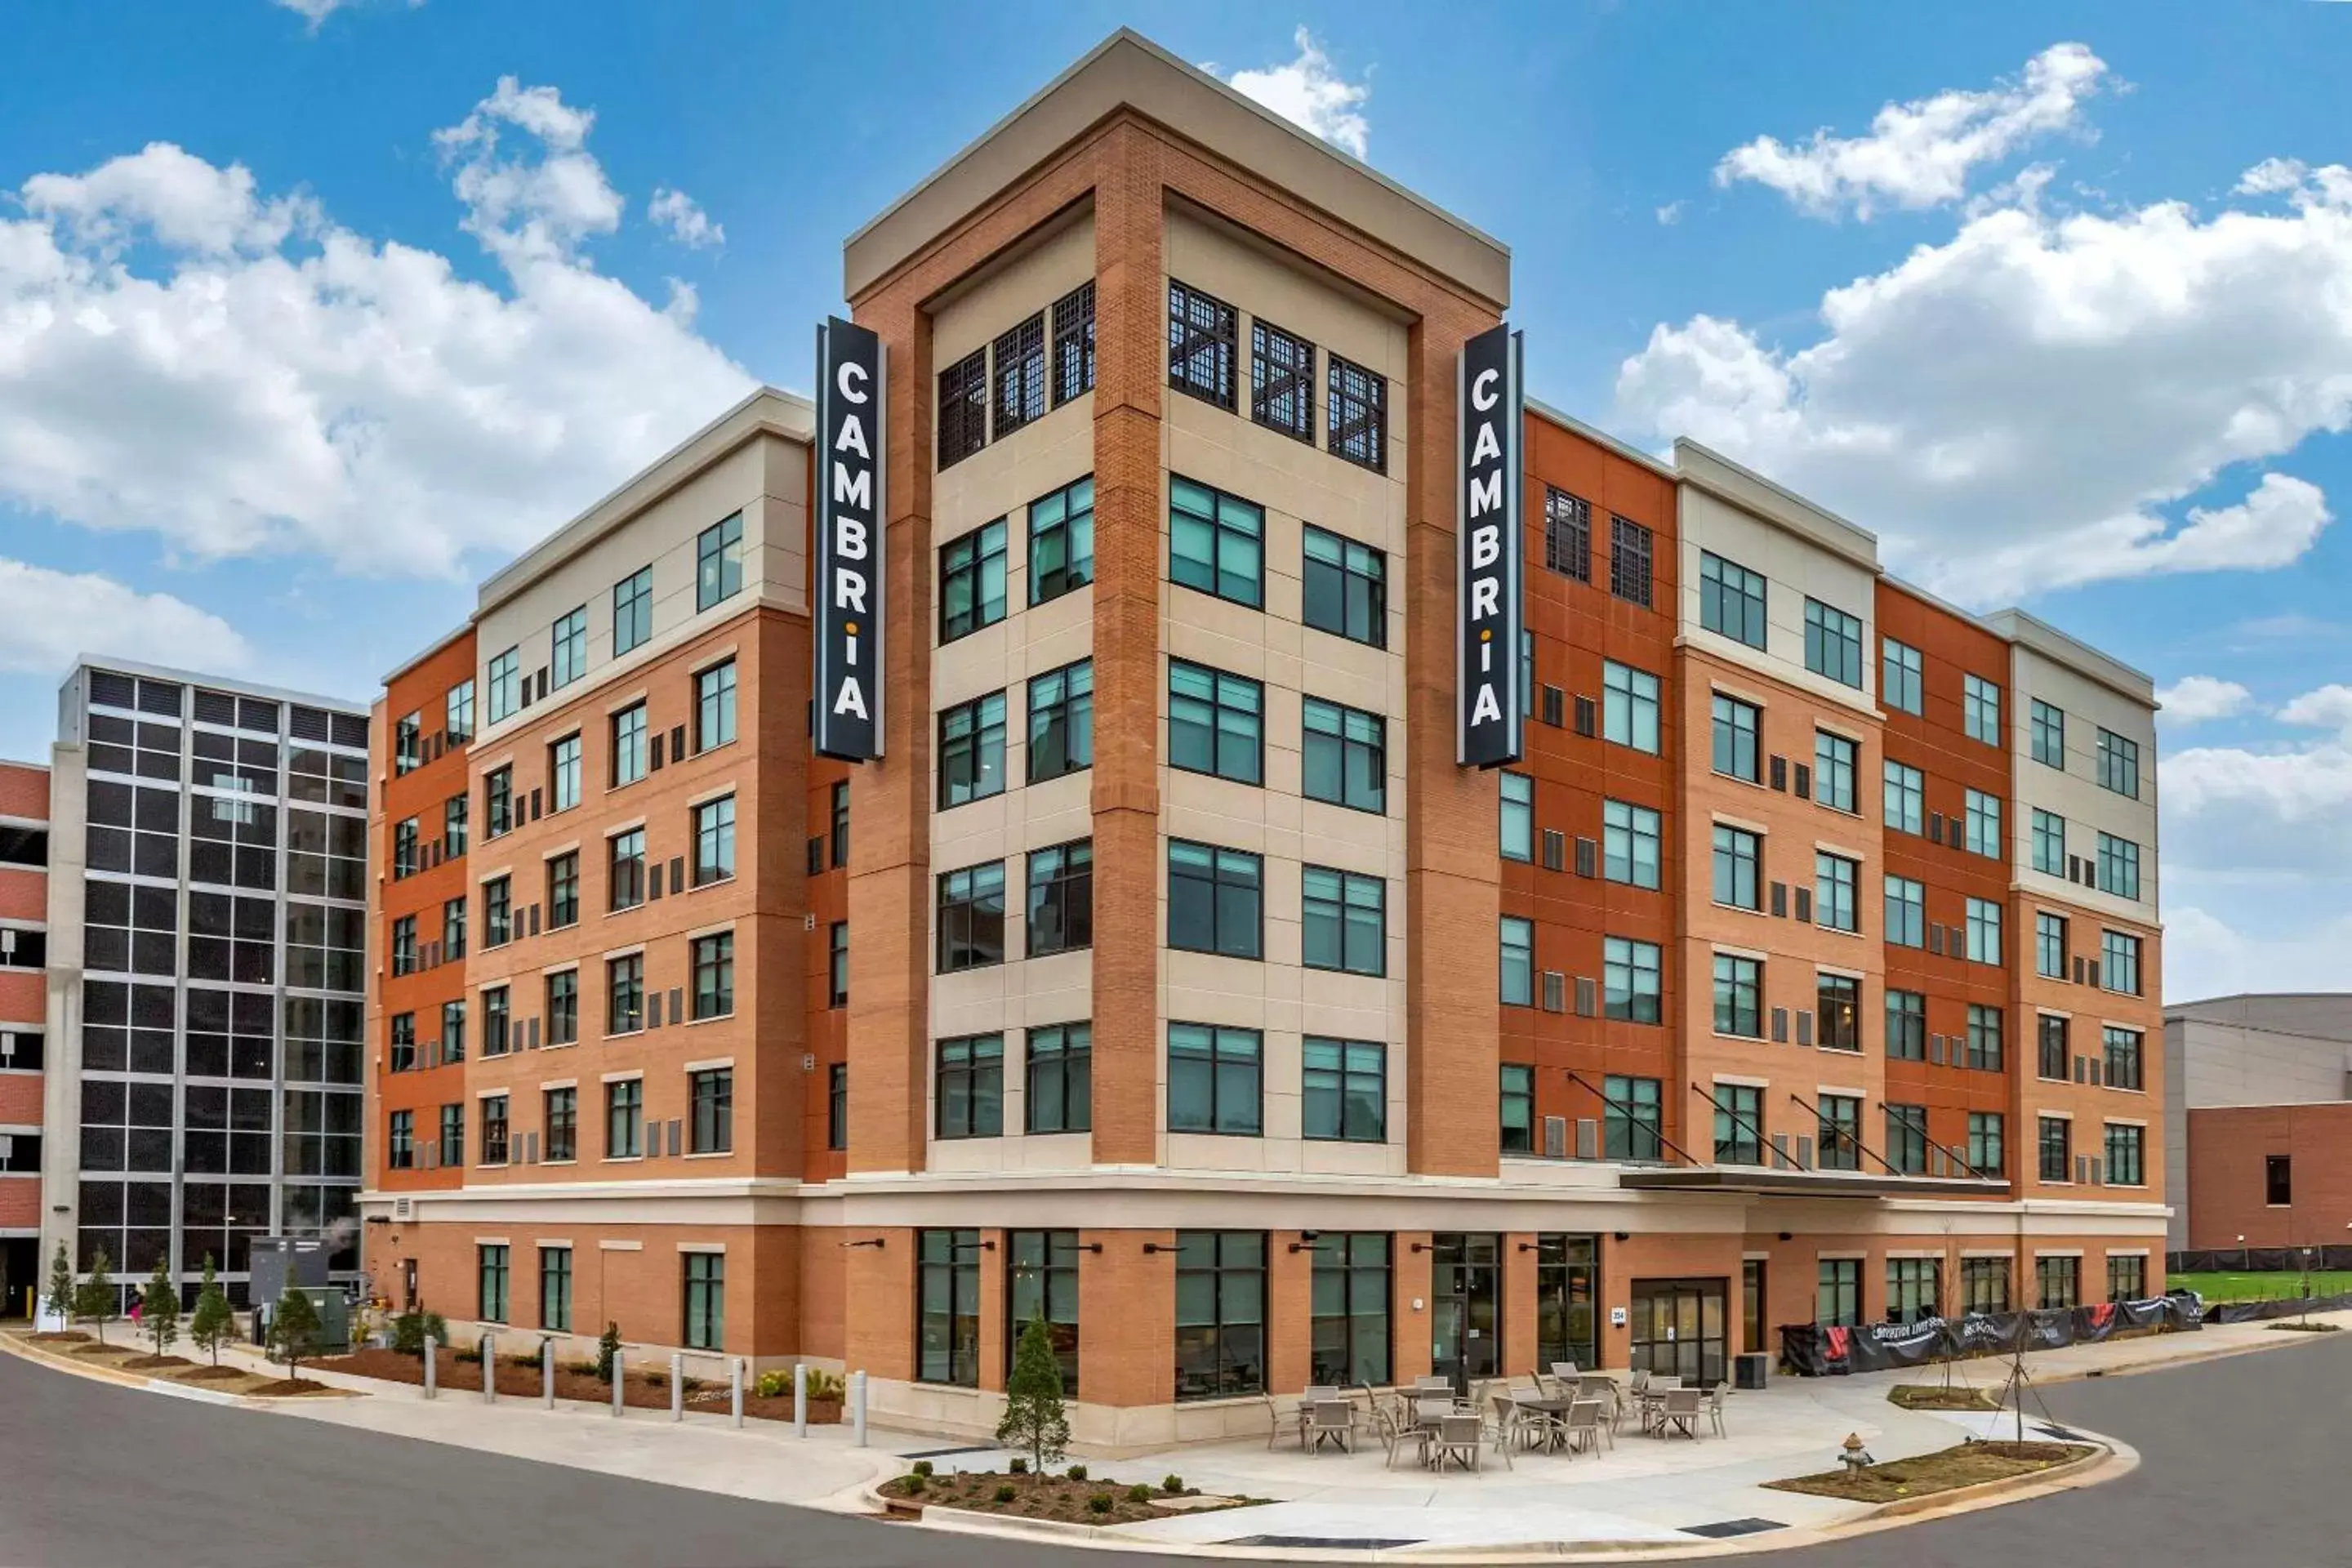 Property building in Cambria Hotel Rock Hill - University Center